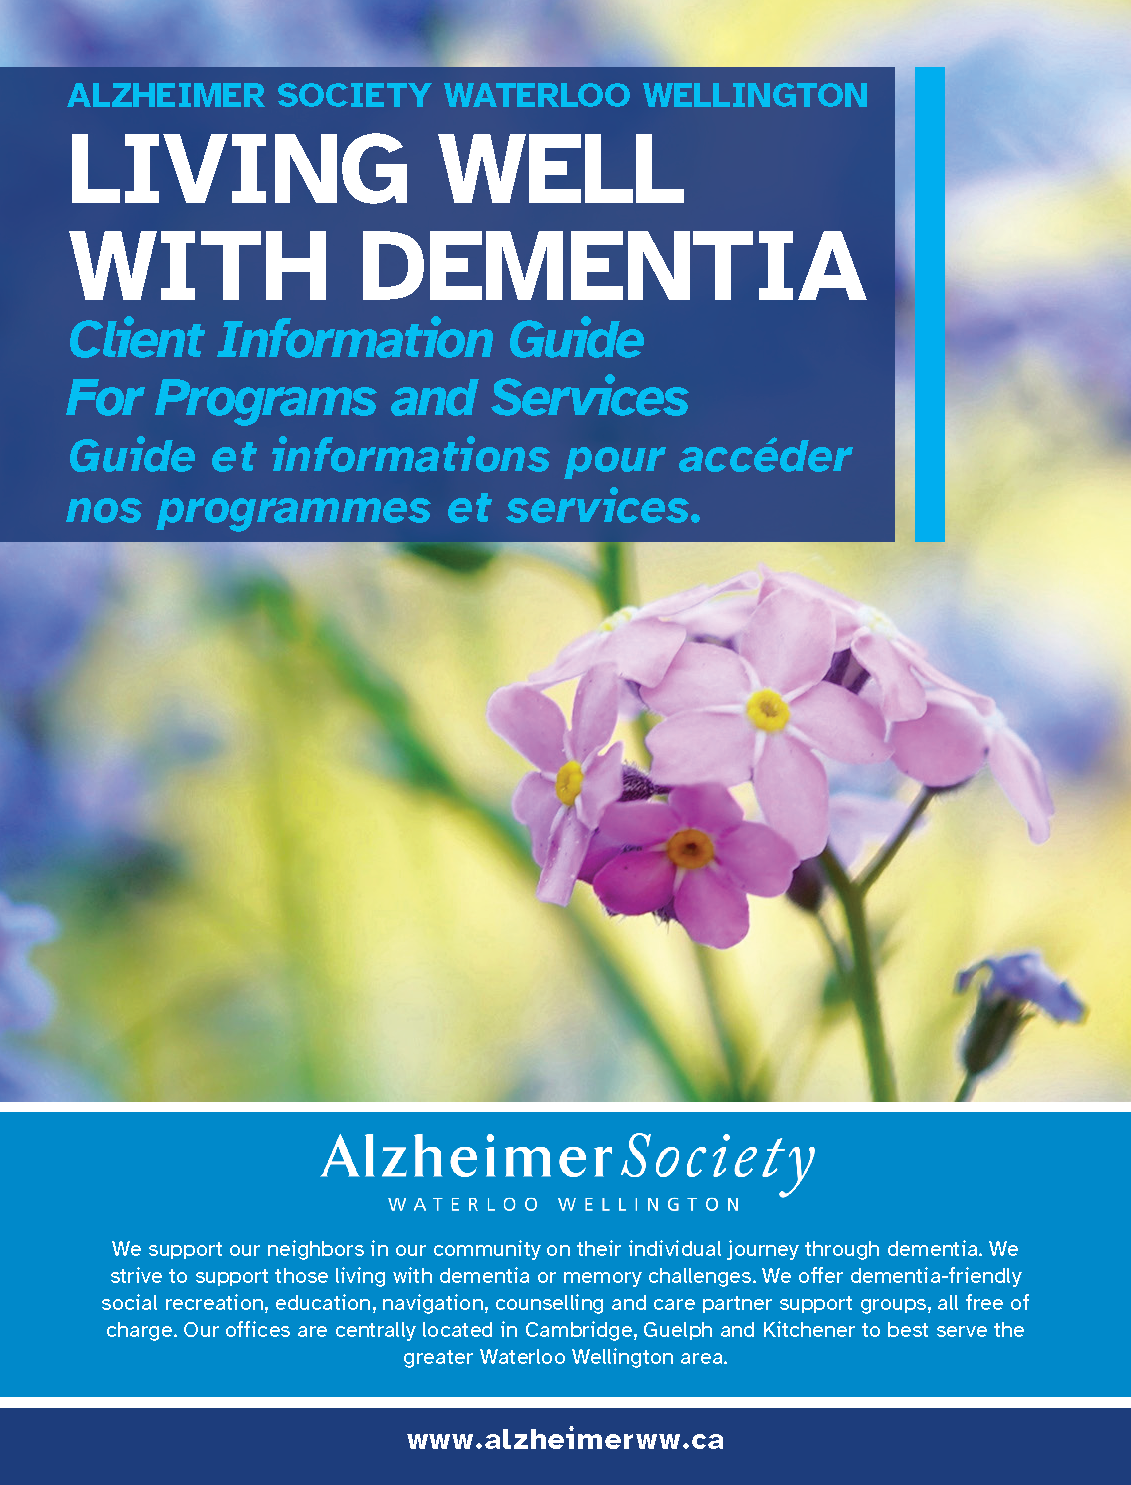 Title: Living Well With Dementia: Client Information Guide for Programs and Services. Photo: Pink Forget-Me-Not on a blurred colourful background.